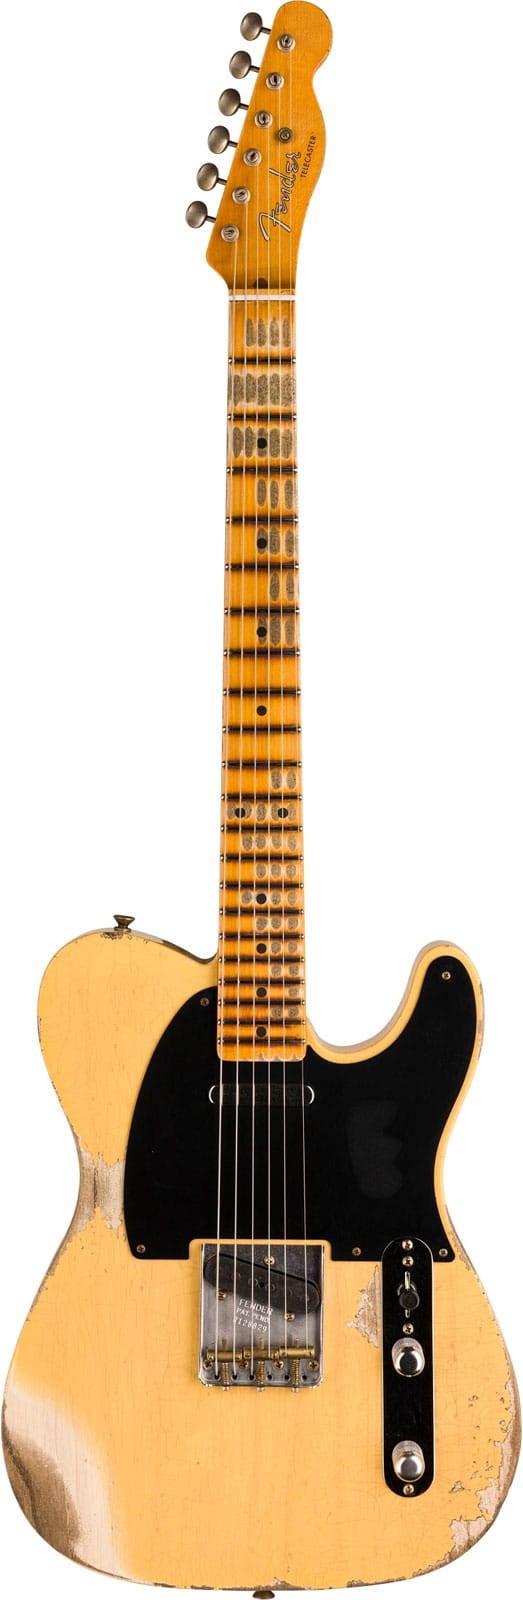 FENDER CUSTOM SHOP TELECASTER CUSTOM TIME MACHINE '54 - HEAVY RELIC, FADED AGED NOCASTER BLONDE